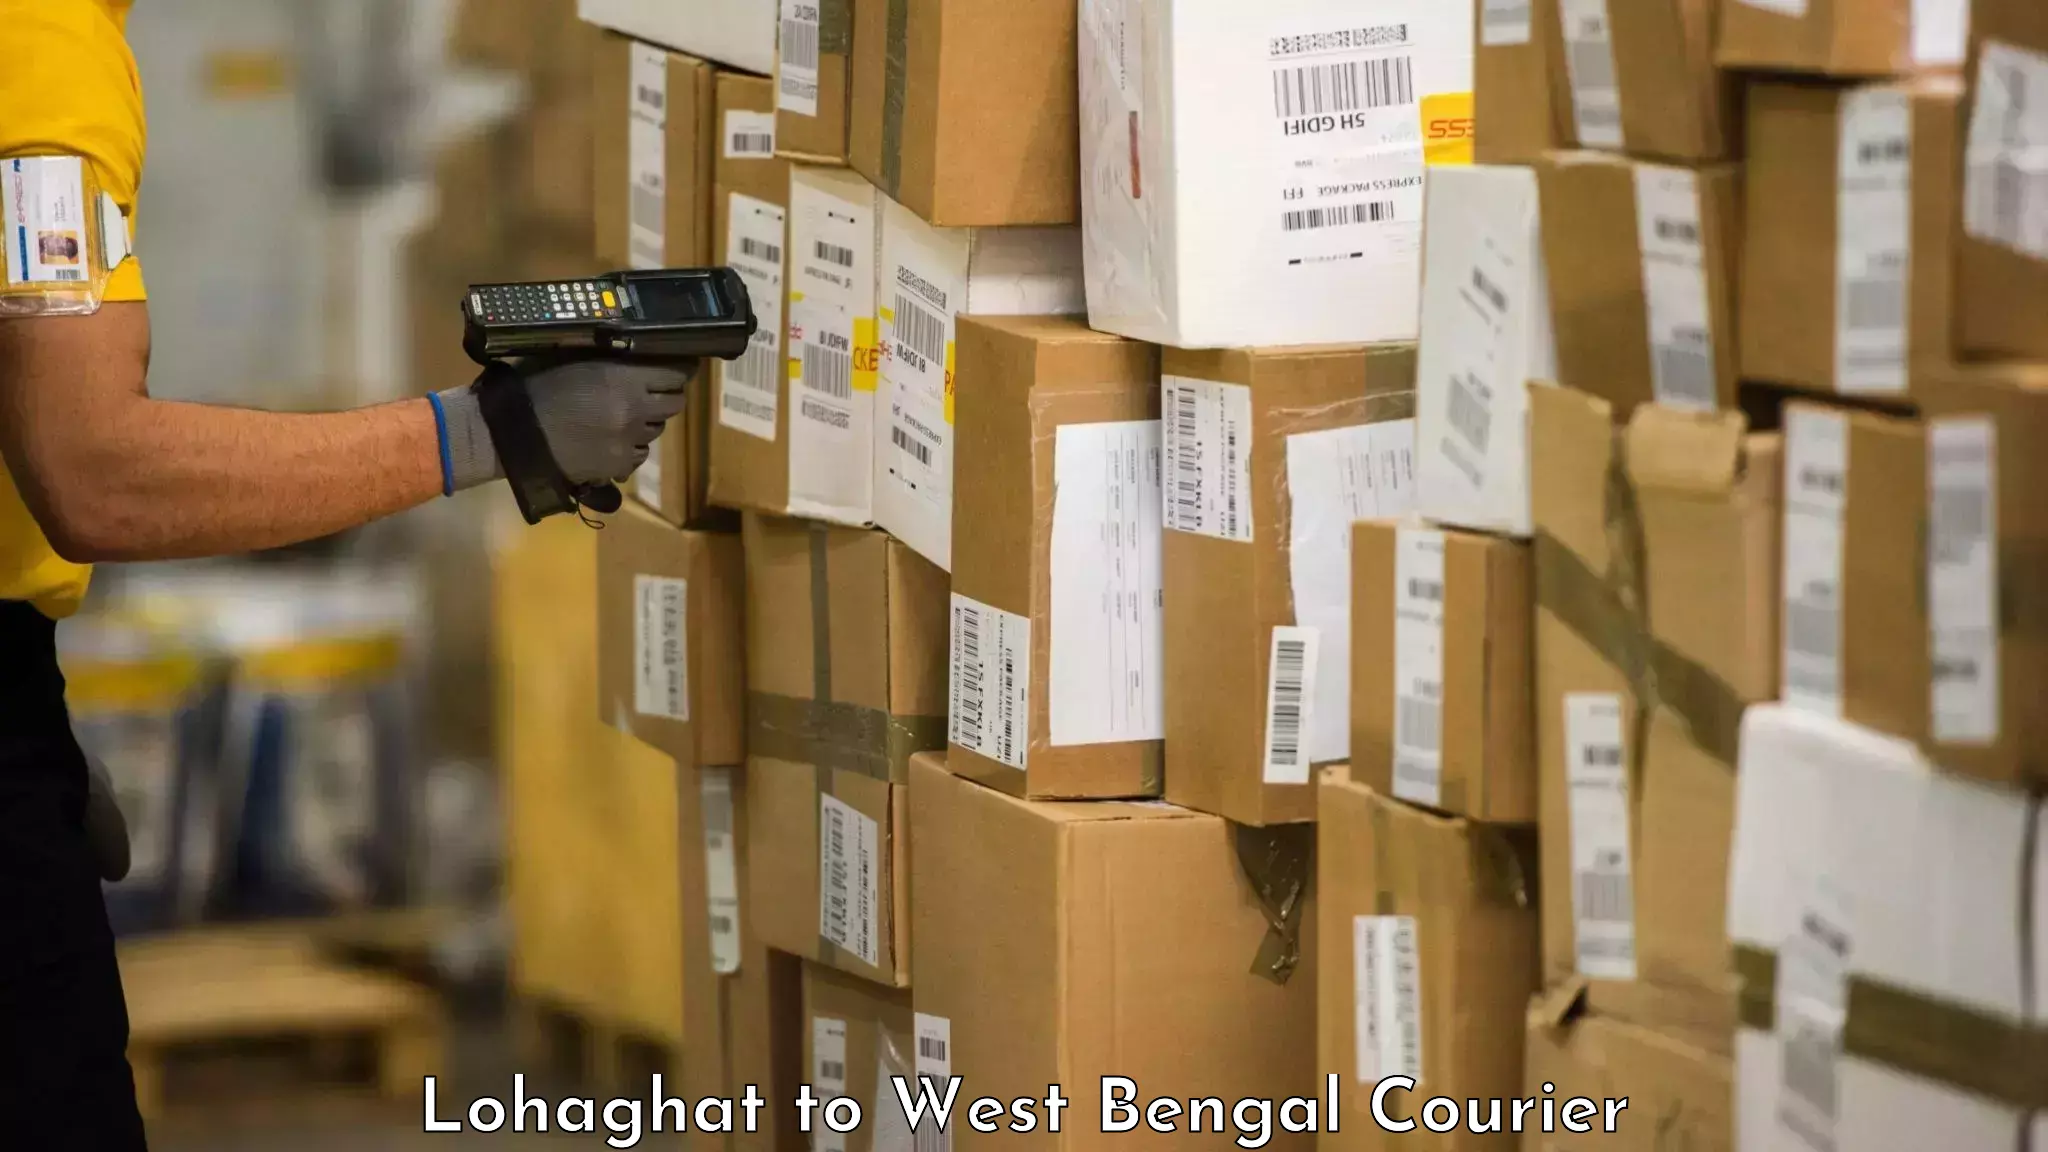 Luggage transport consultancy Lohaghat to West Bengal